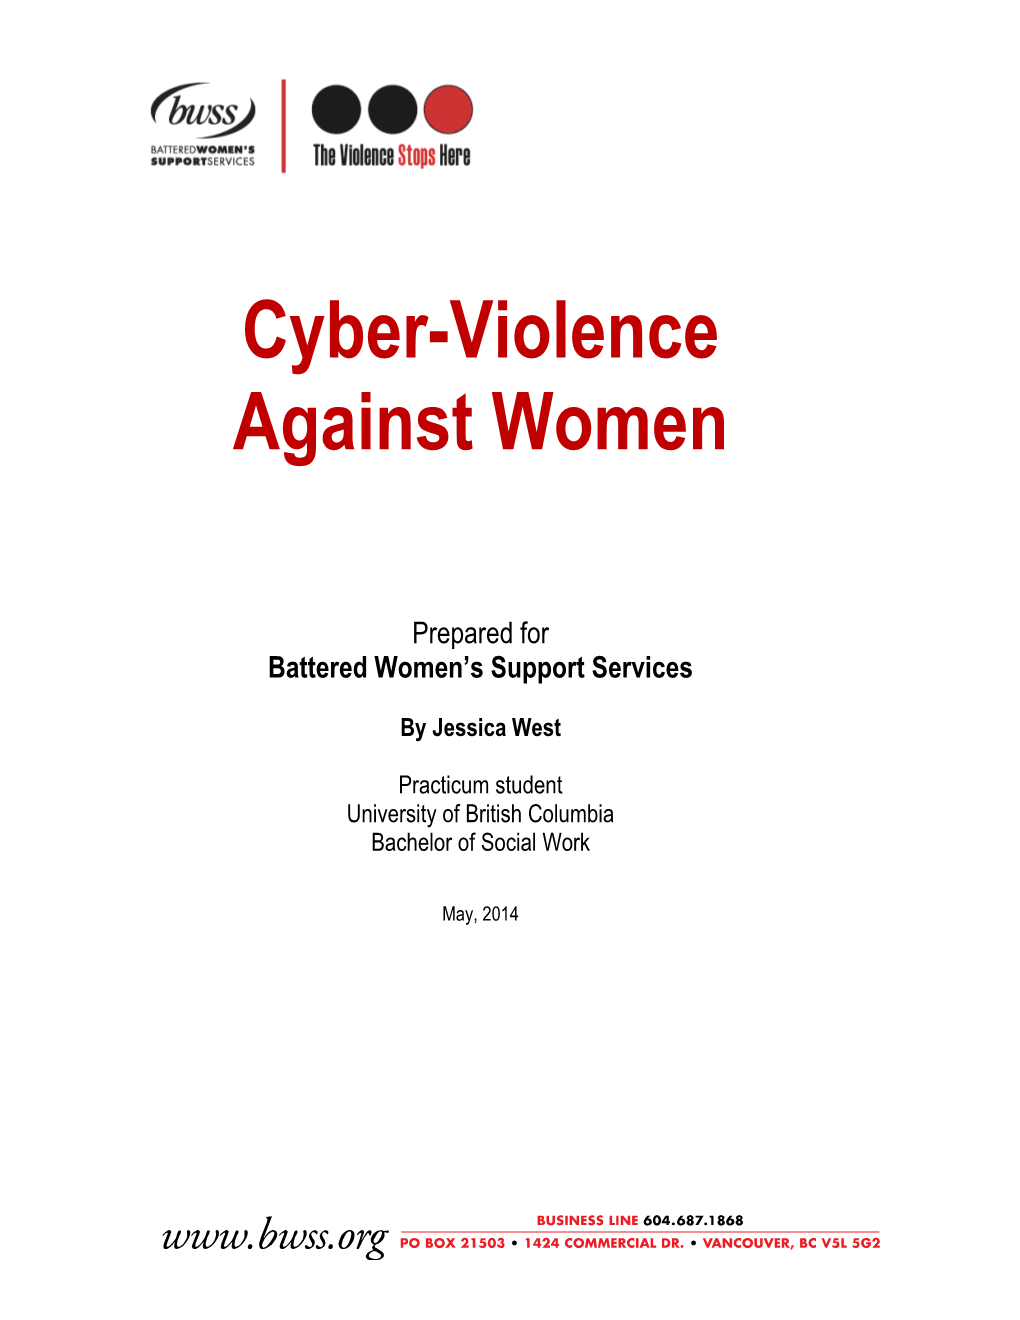 Cyber-Violence Against Women